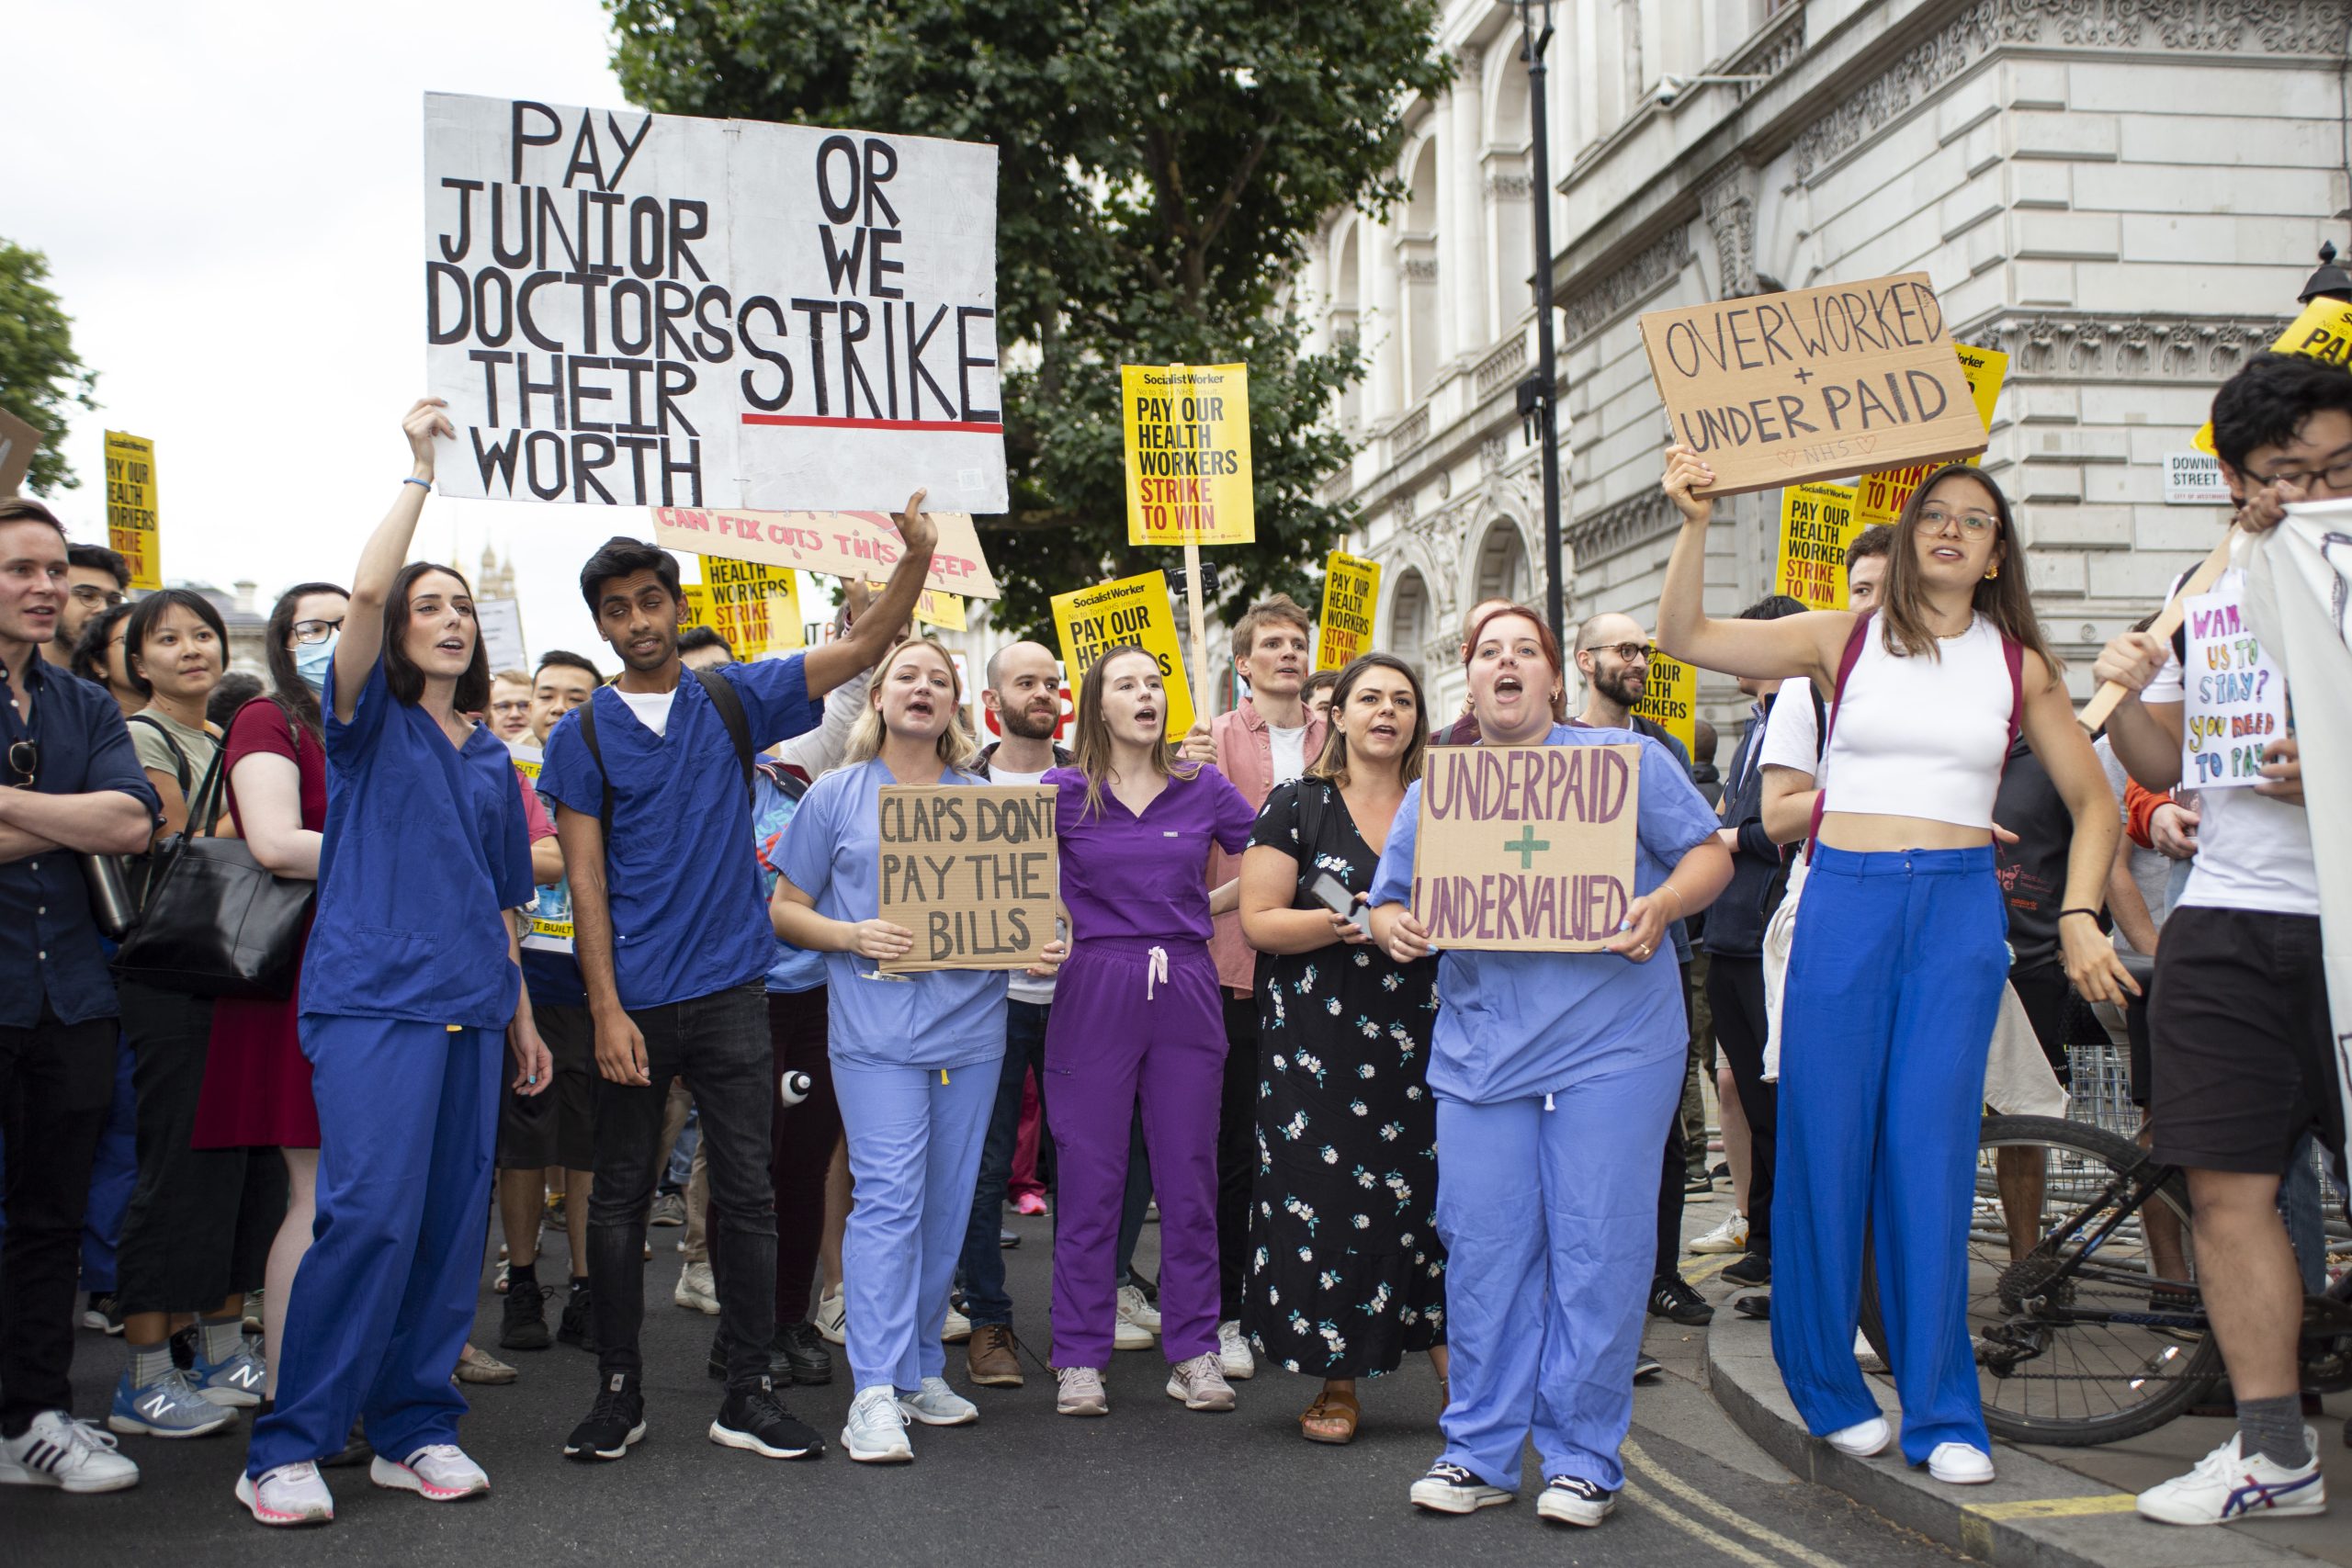 The Junior Doctors’ Strike in England: A Fight for Fair Pay